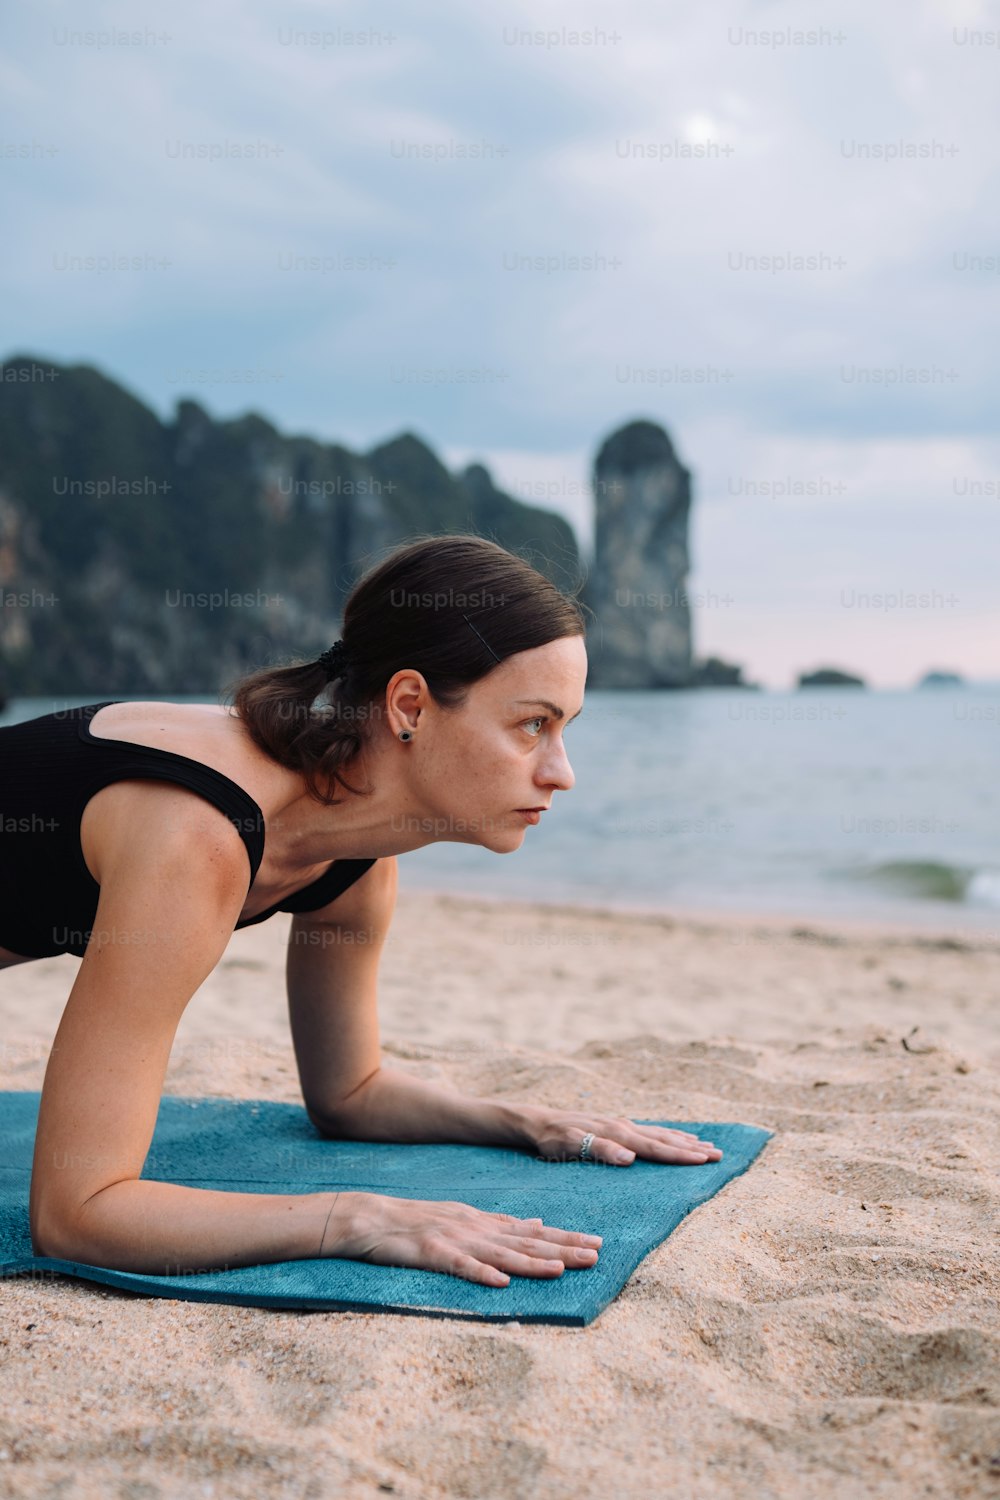 a woman is doing push ups on a towel on the beach